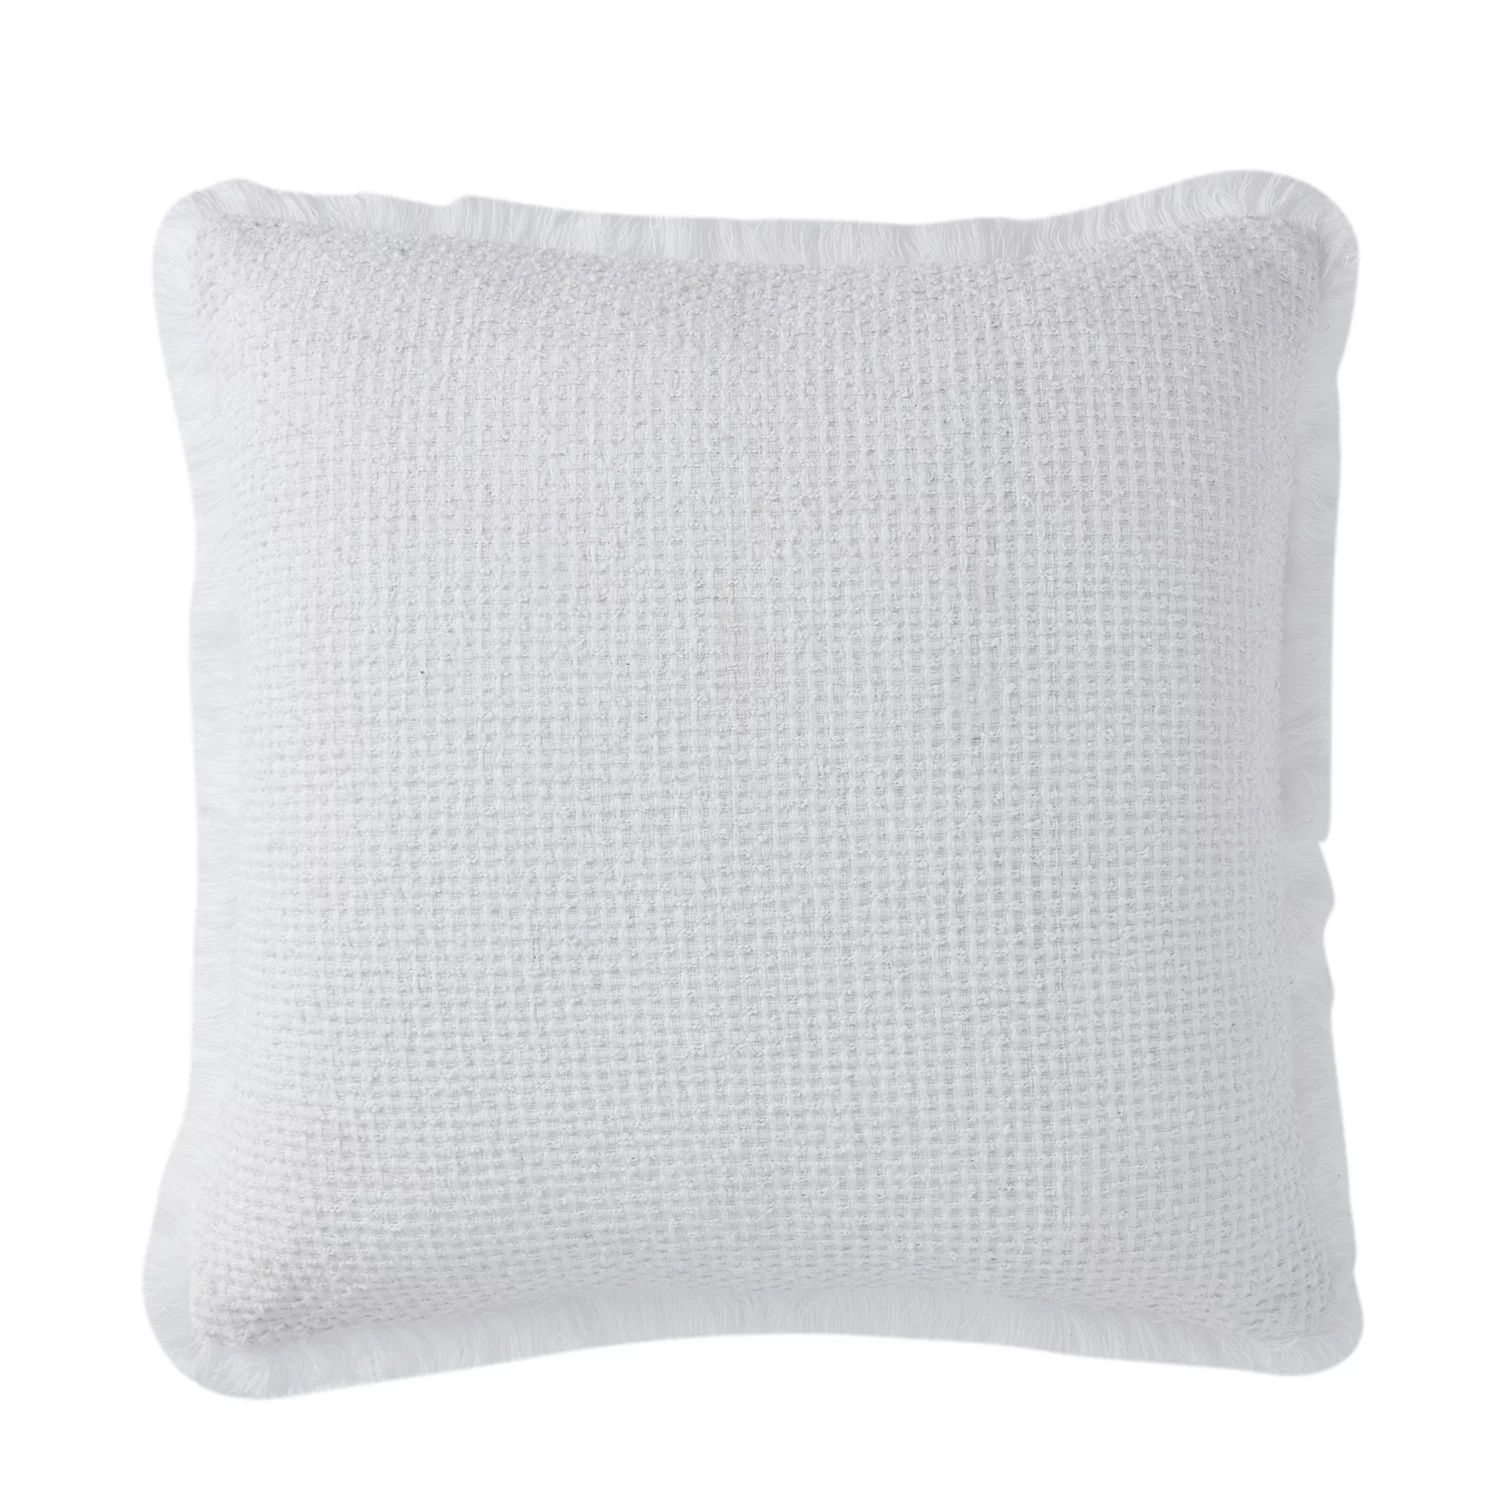 My Texas House Sabine Woven Fringe Square Decorative Pillow Cover, 20" x 20", Bright White | Walmart (US)